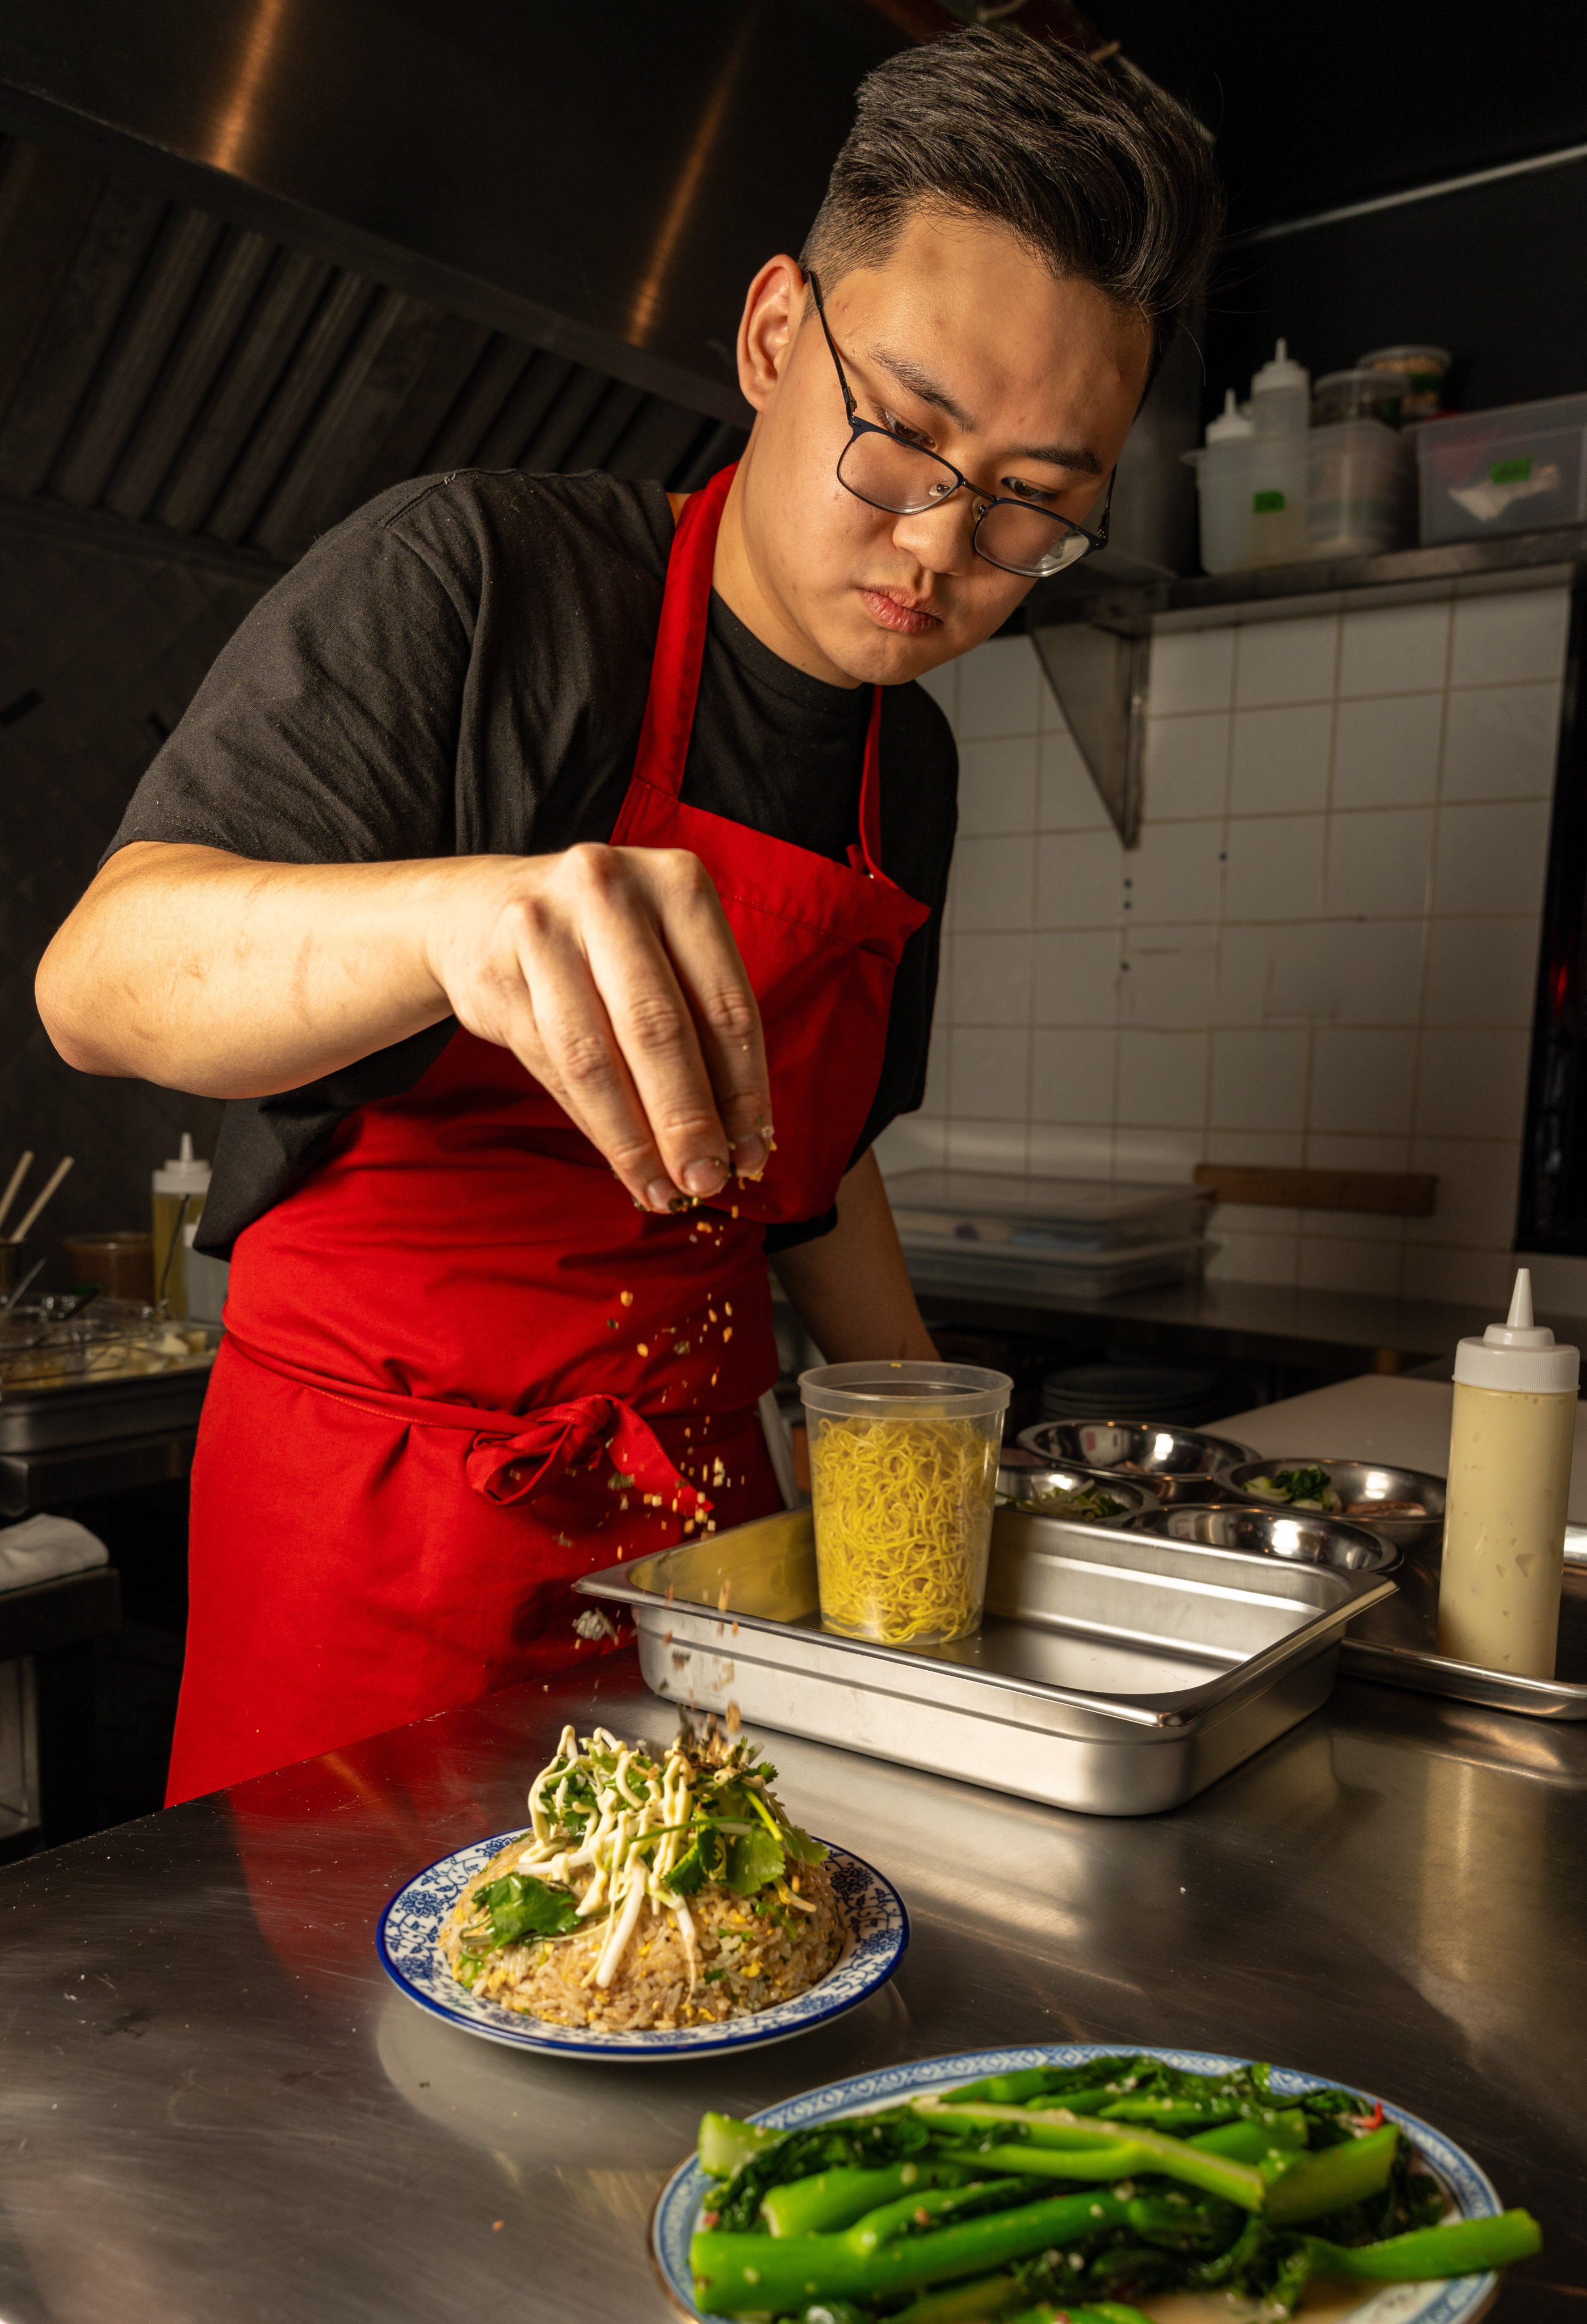 Chinese-Canadian chef Andersen Lee at his Montreal restaurant Oncle Lee. Photo: Scott Usheroff